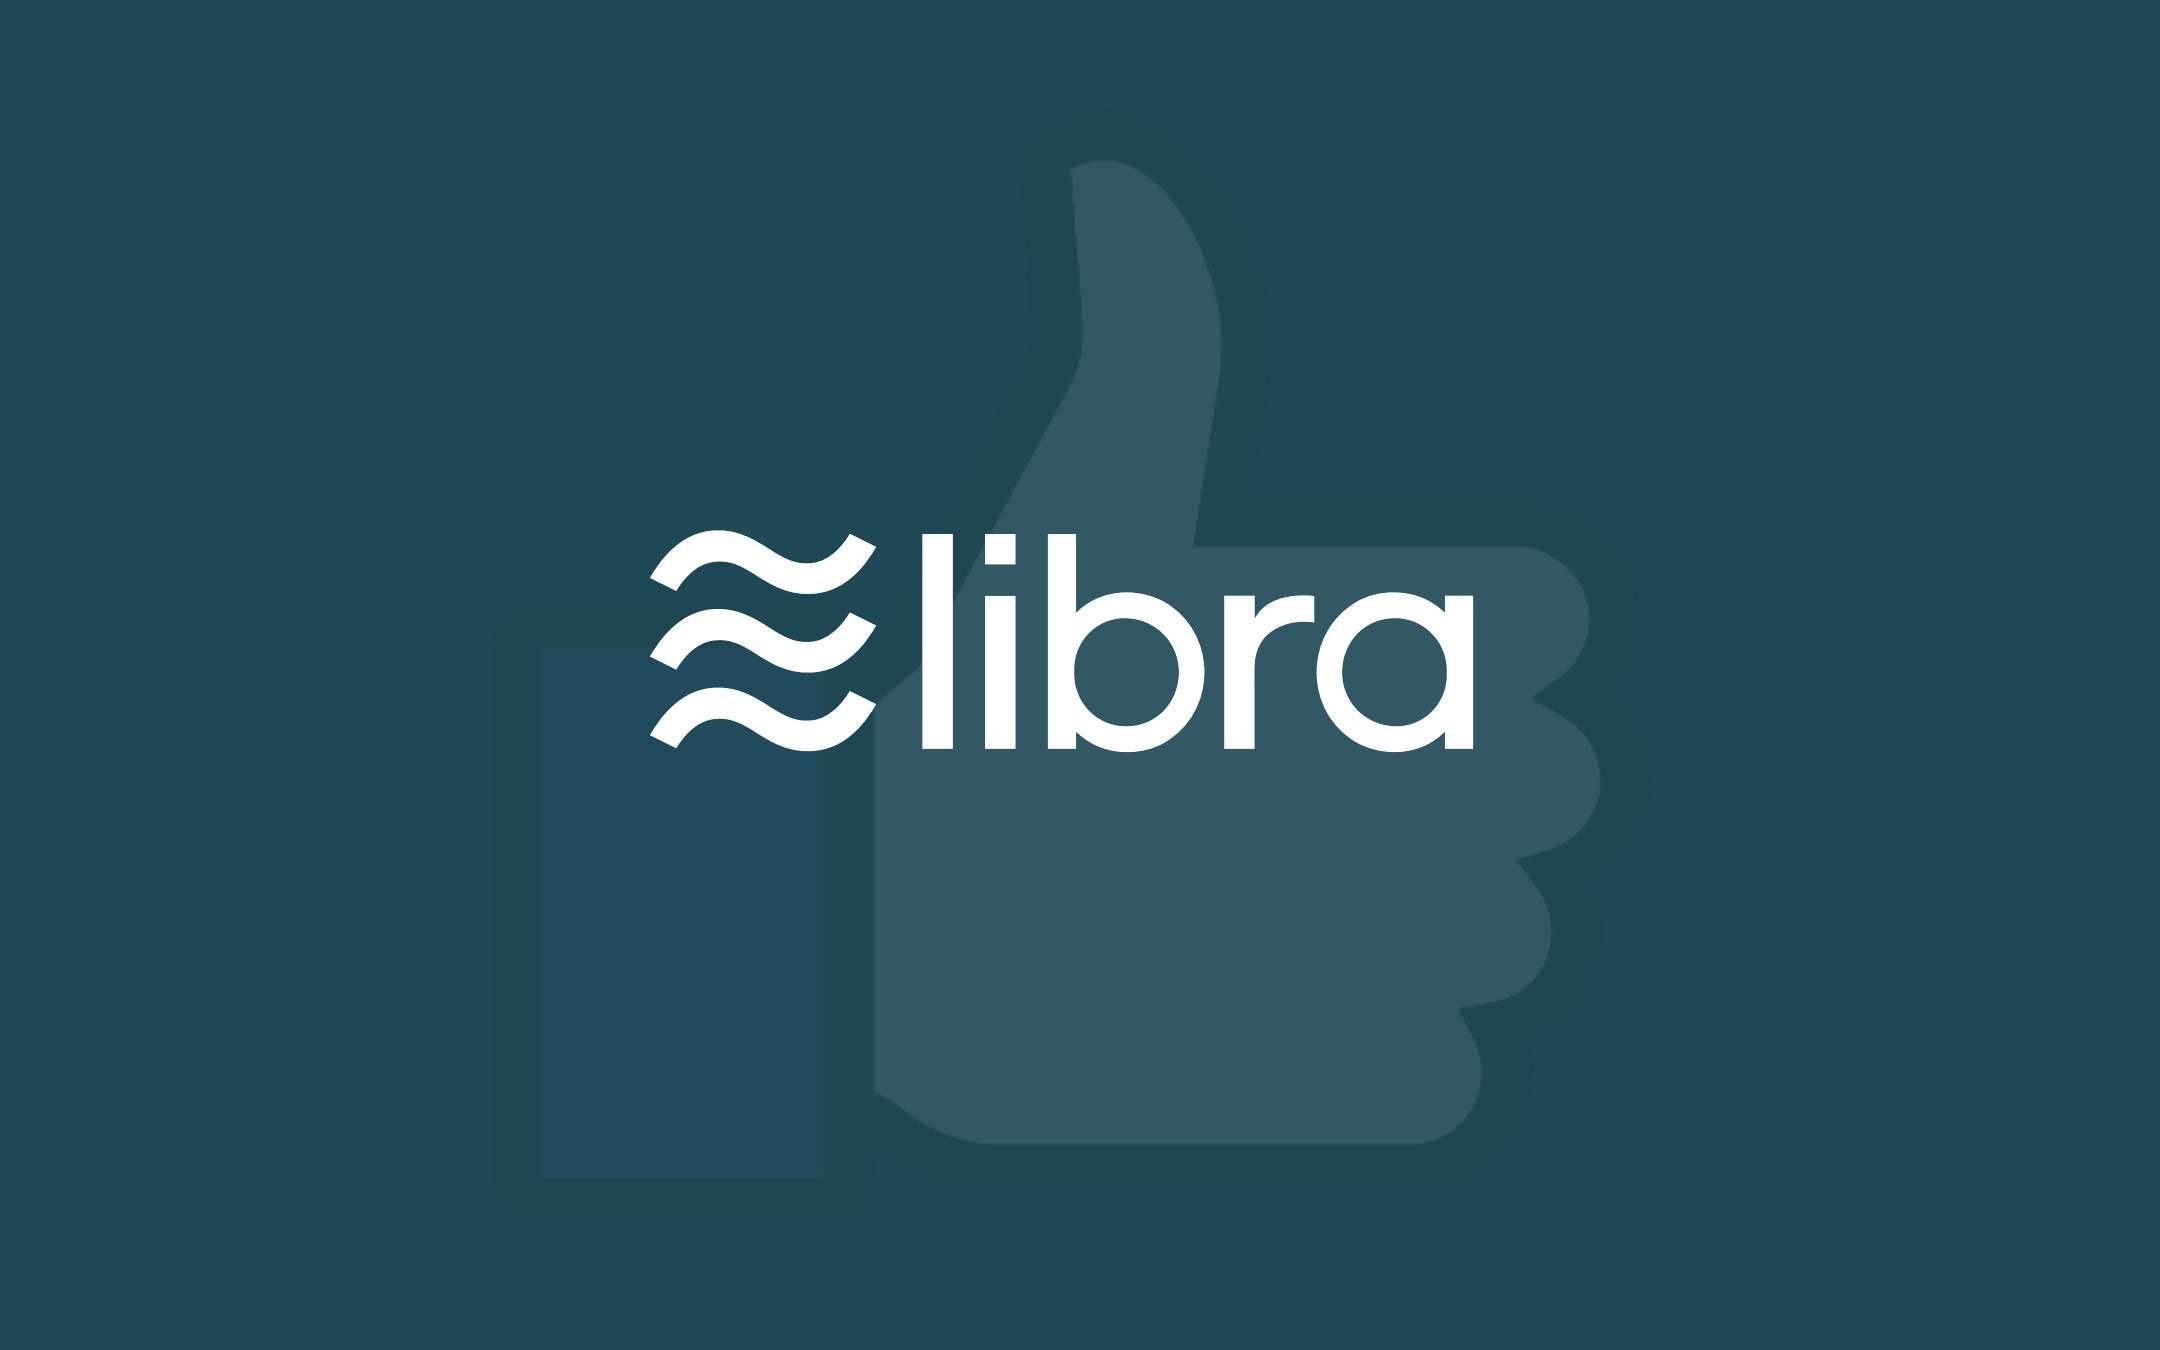 Libra, Facebook's cryptocurrency, is about to arrive